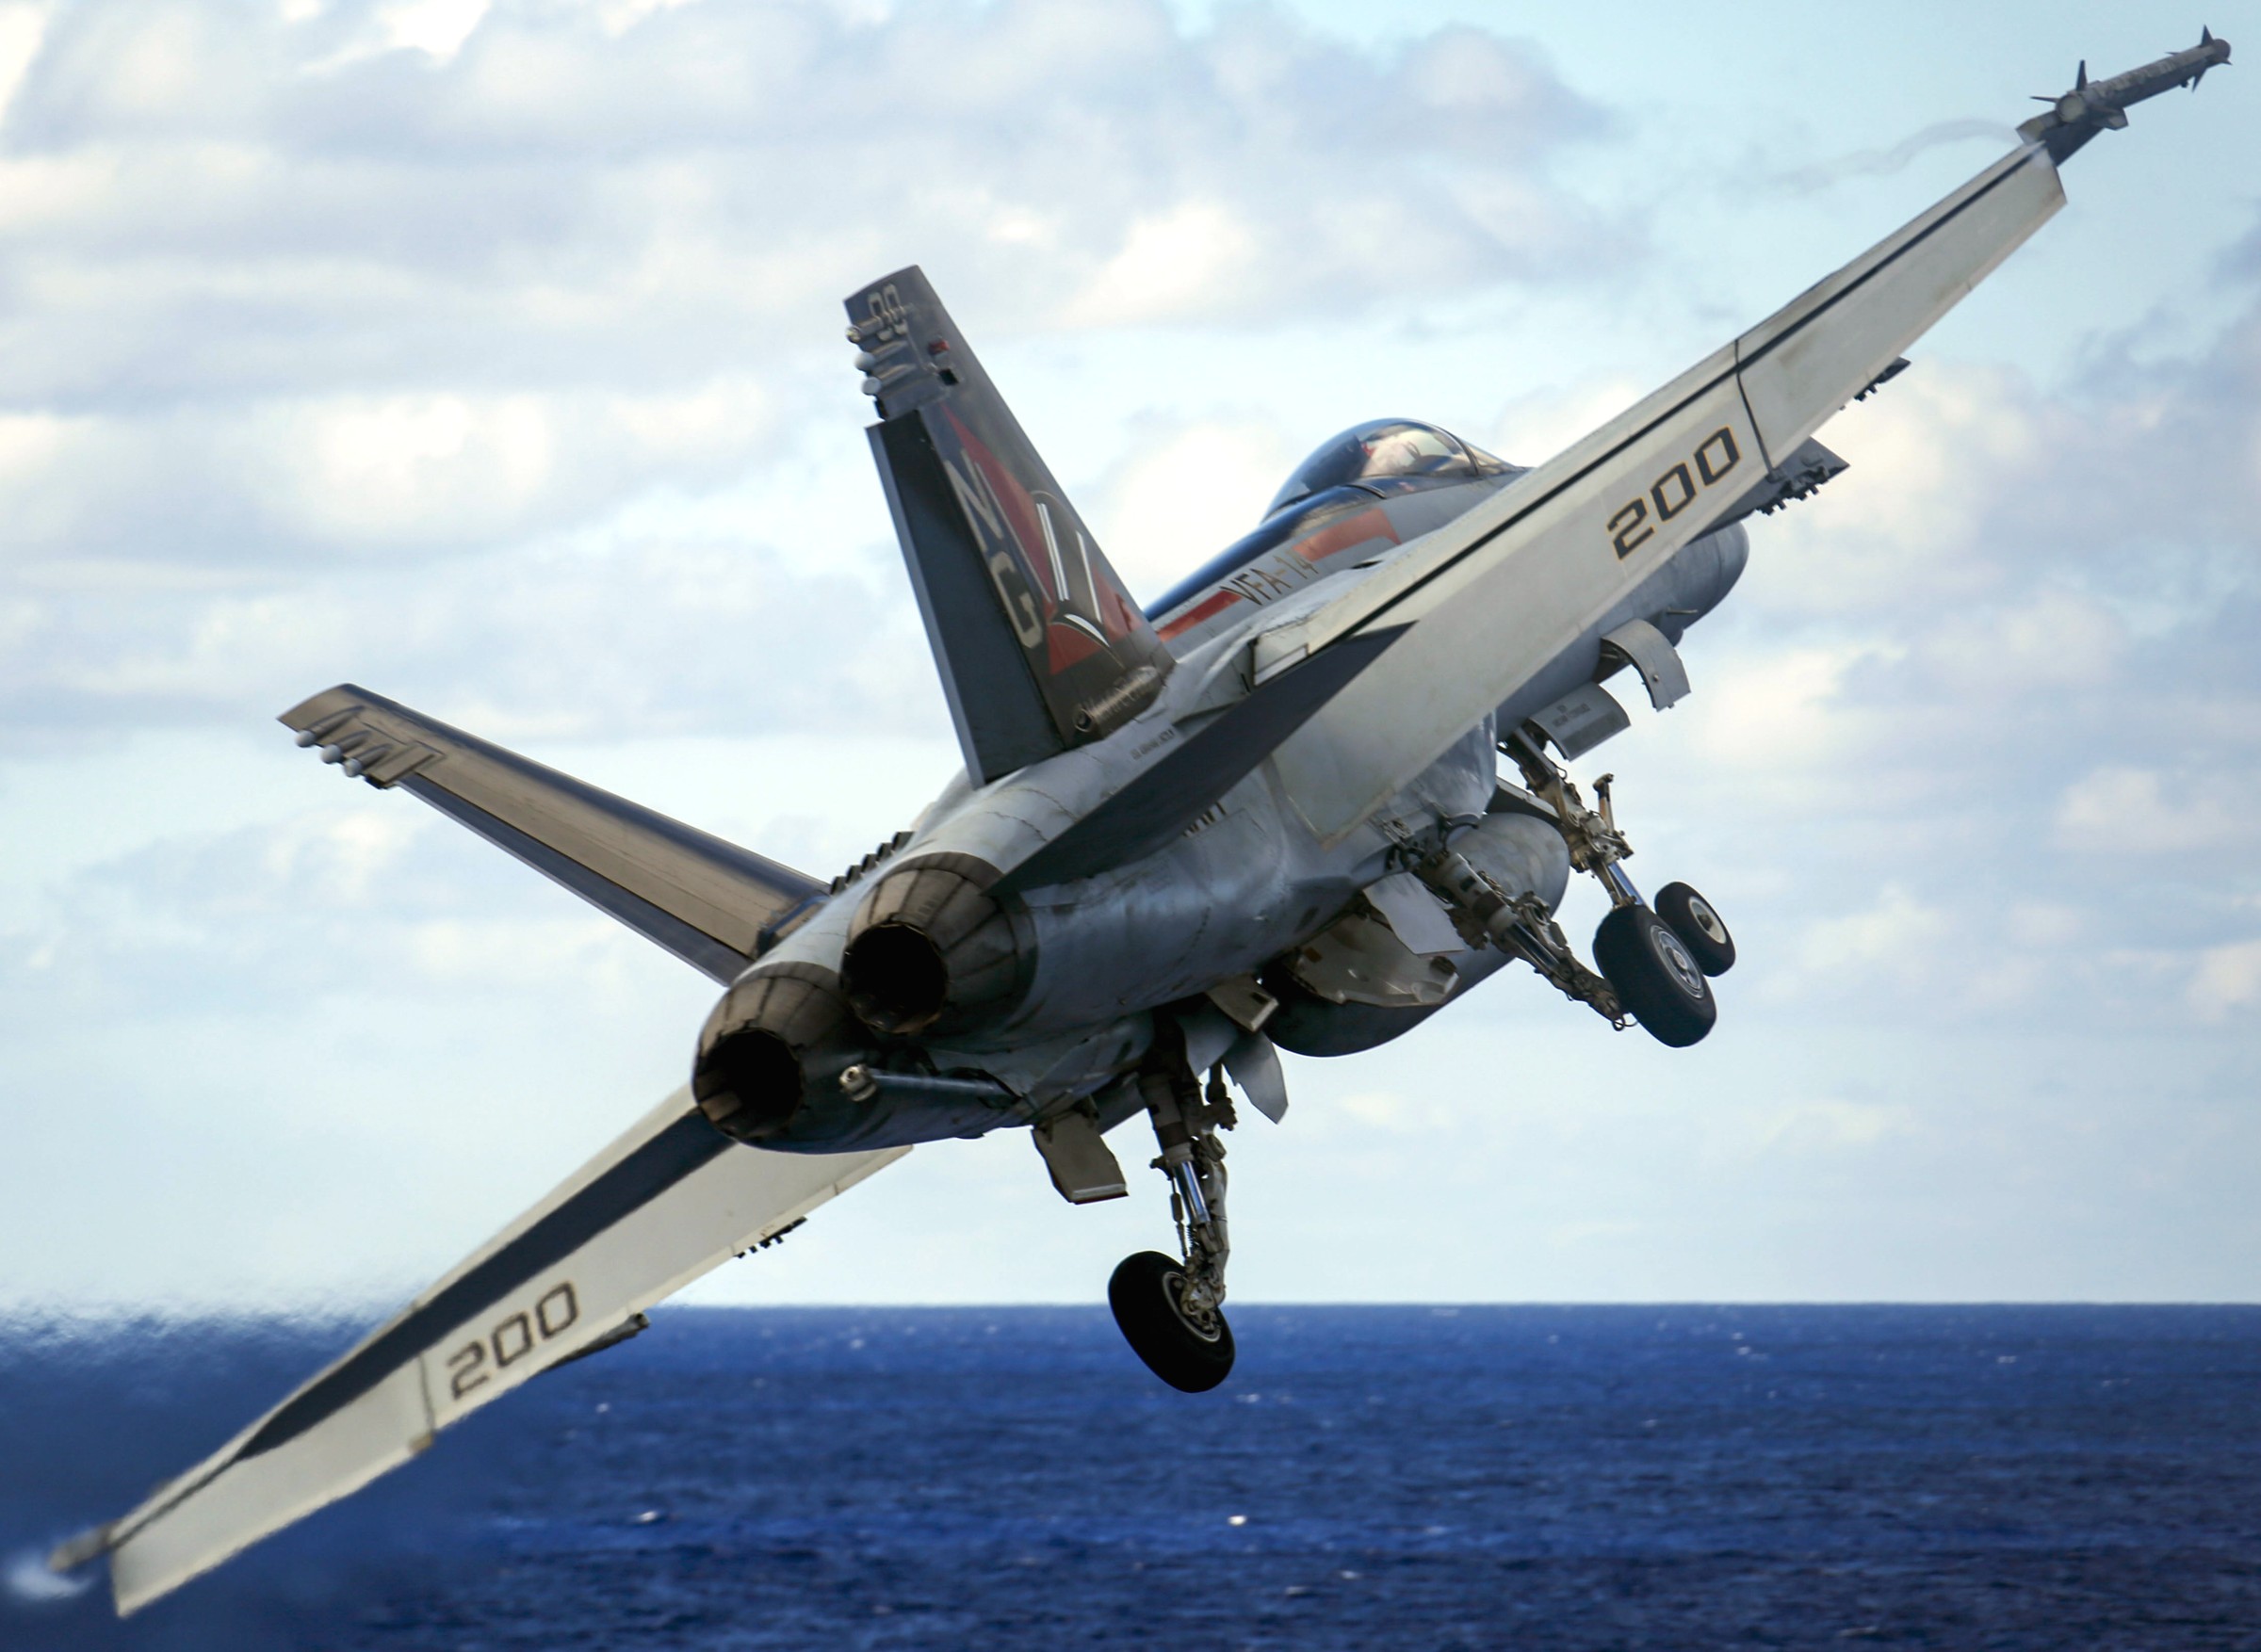 vfa-14 tophatters strike fighter squadron f/a-18e super hornet cvn-72 uss abraham lincoln cvw-9 us navy 92